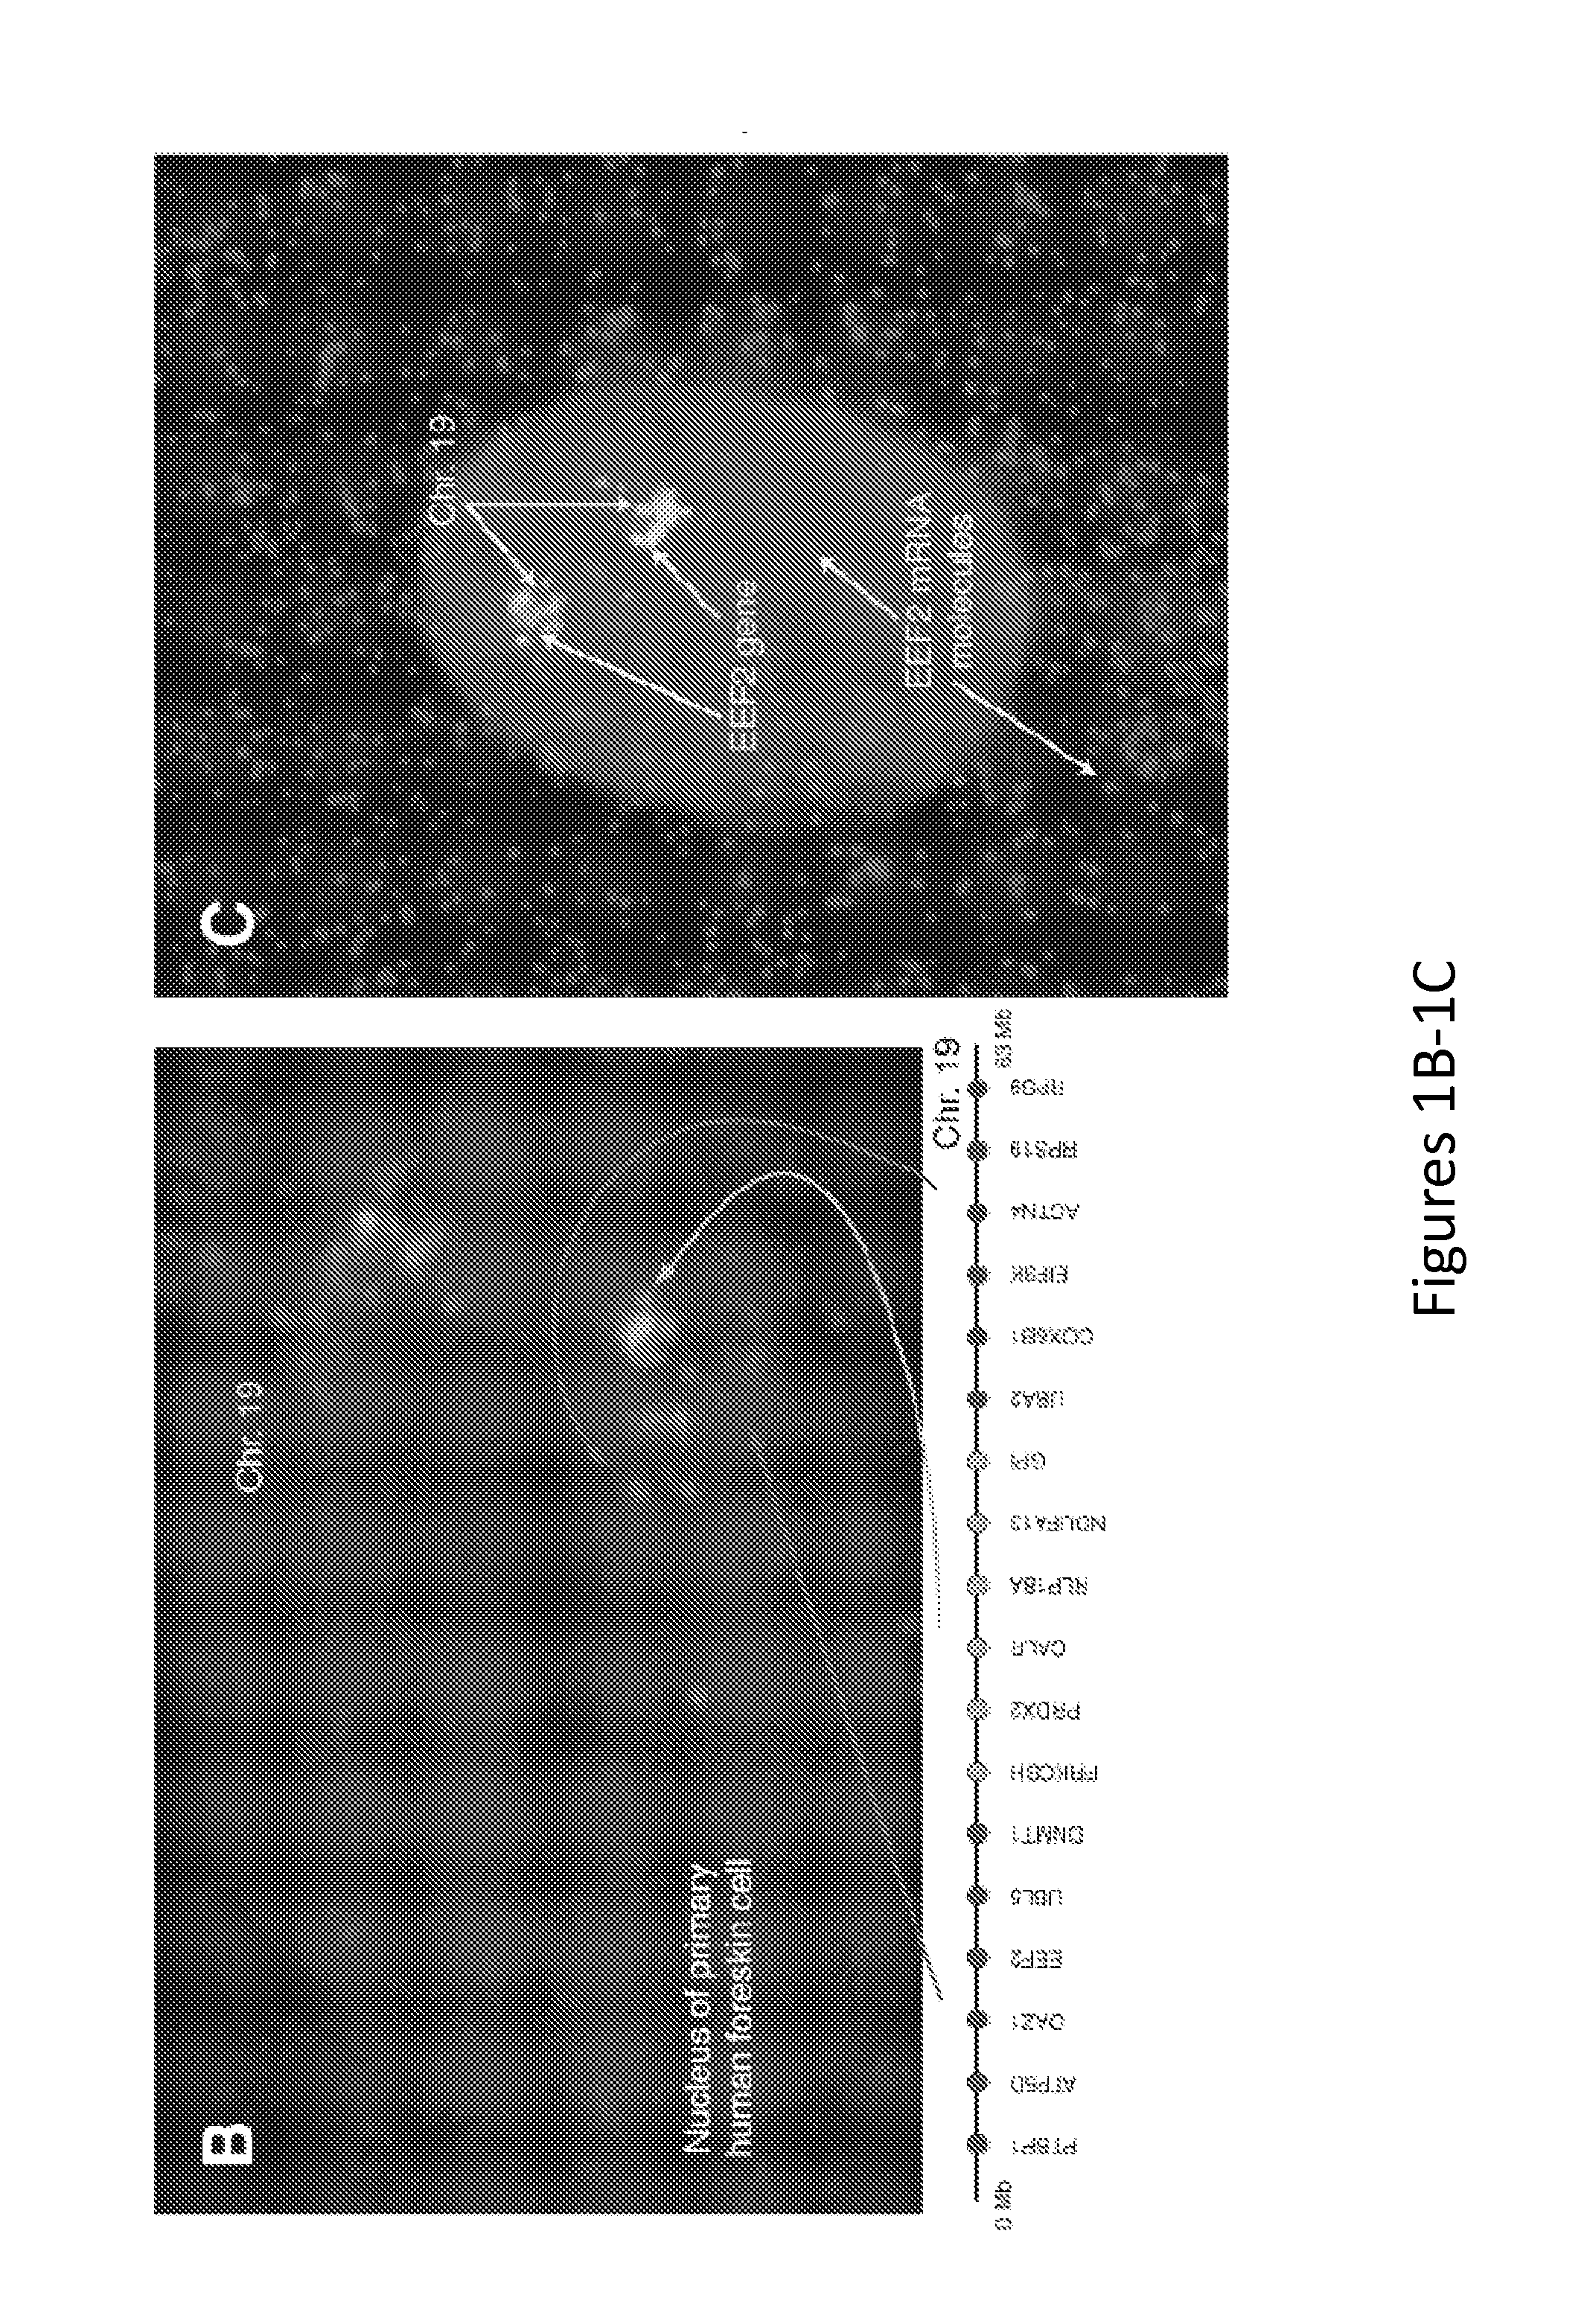 Method for Detecting Chromosome Structure and Gene Expression Simultaneously in Single Cells